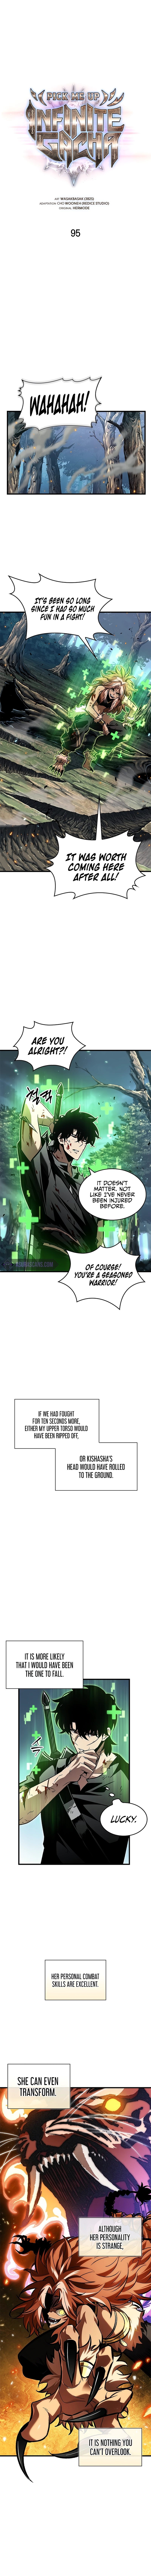 Pick Me Up - Chapter 95 Page 2